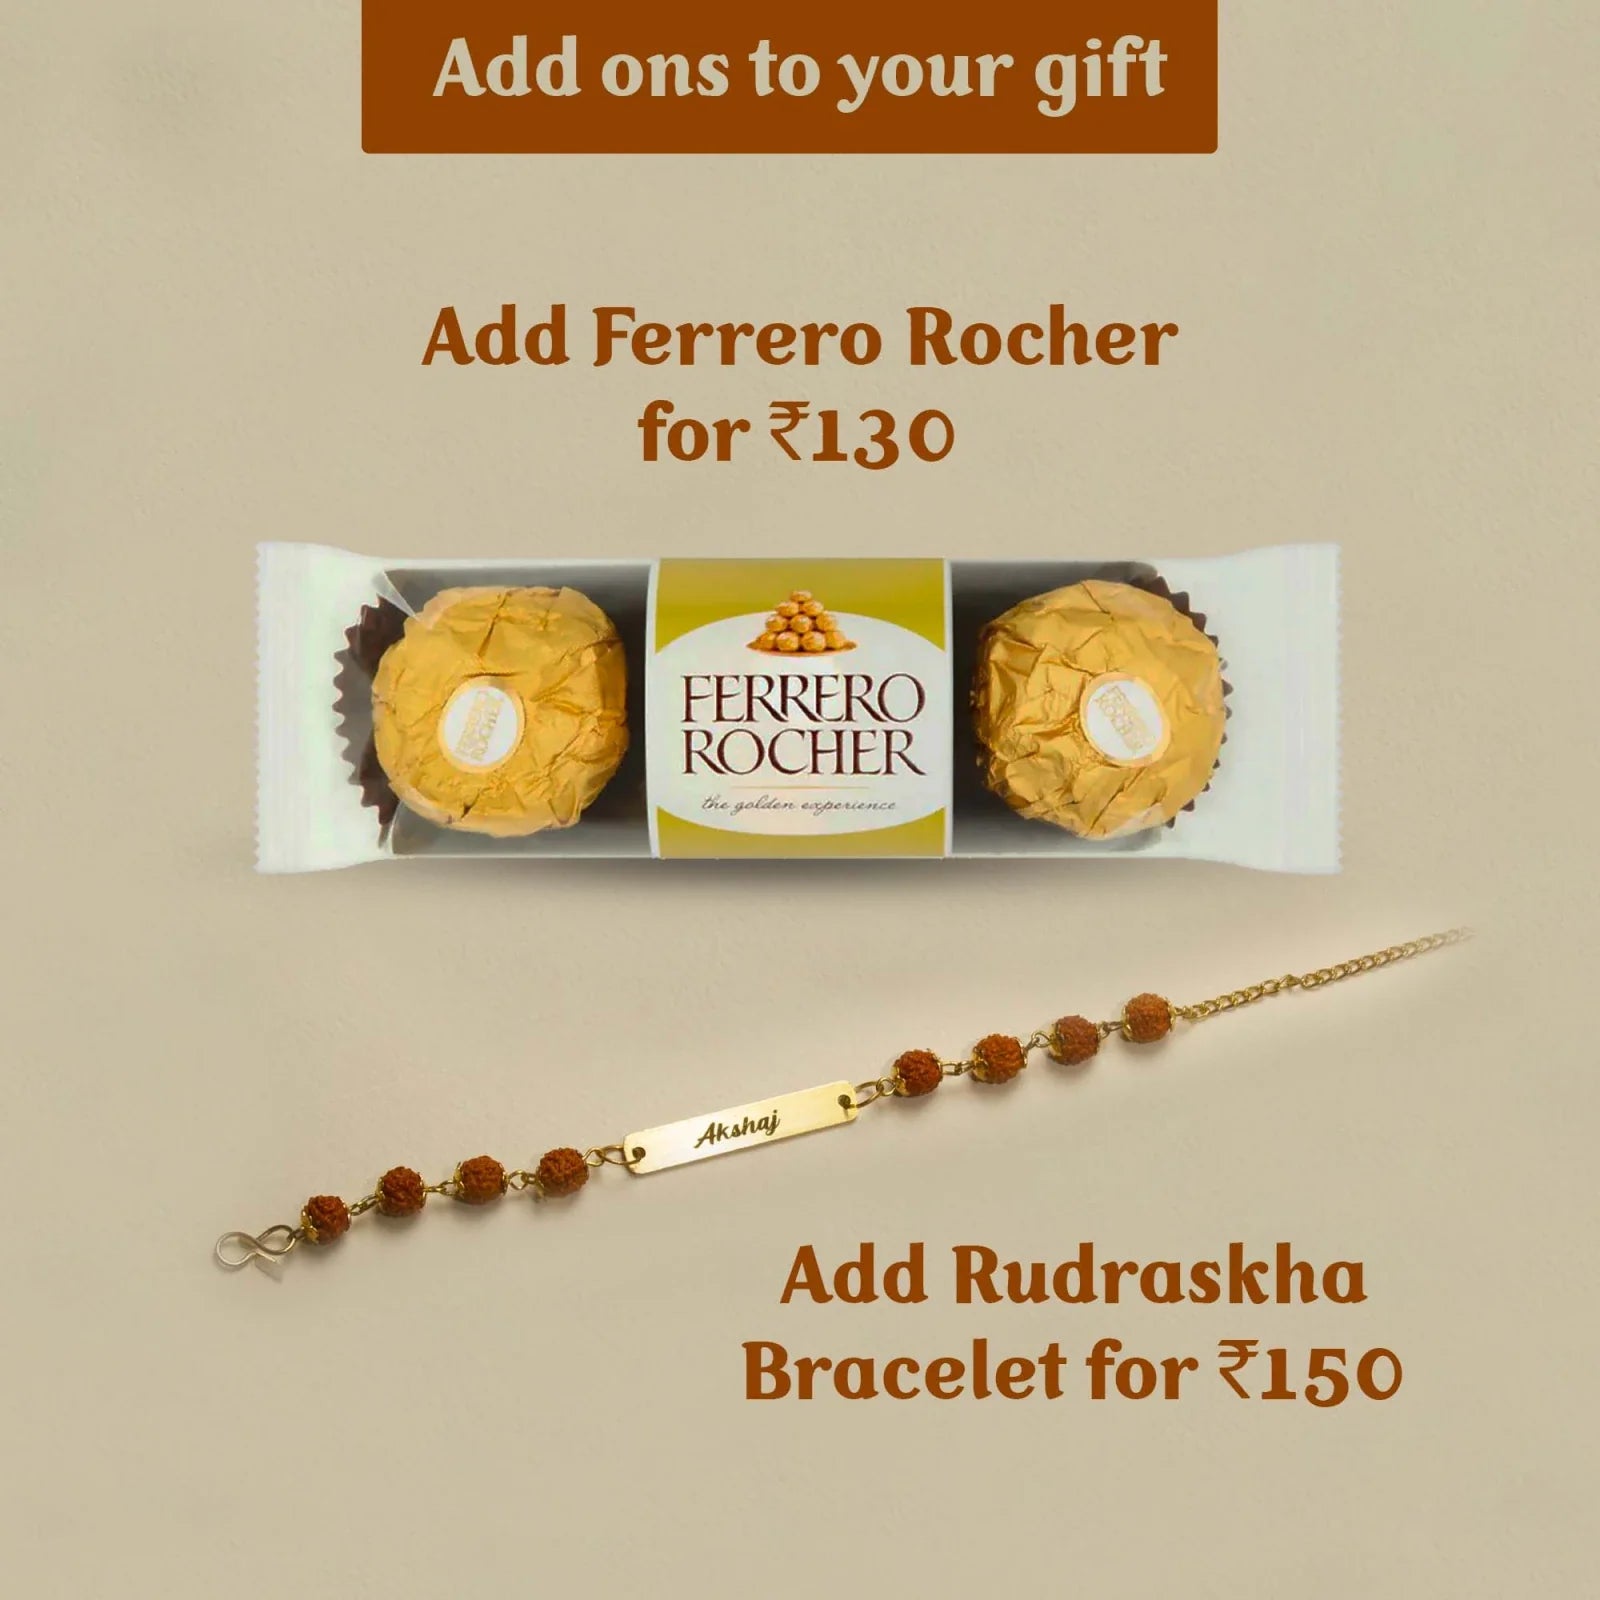 Strengthen the bond with your kirth and kins with our persoalized rudraksha rakhis. Don't forget to mark the sweetness of every occasion with the delights of ferraro rocher